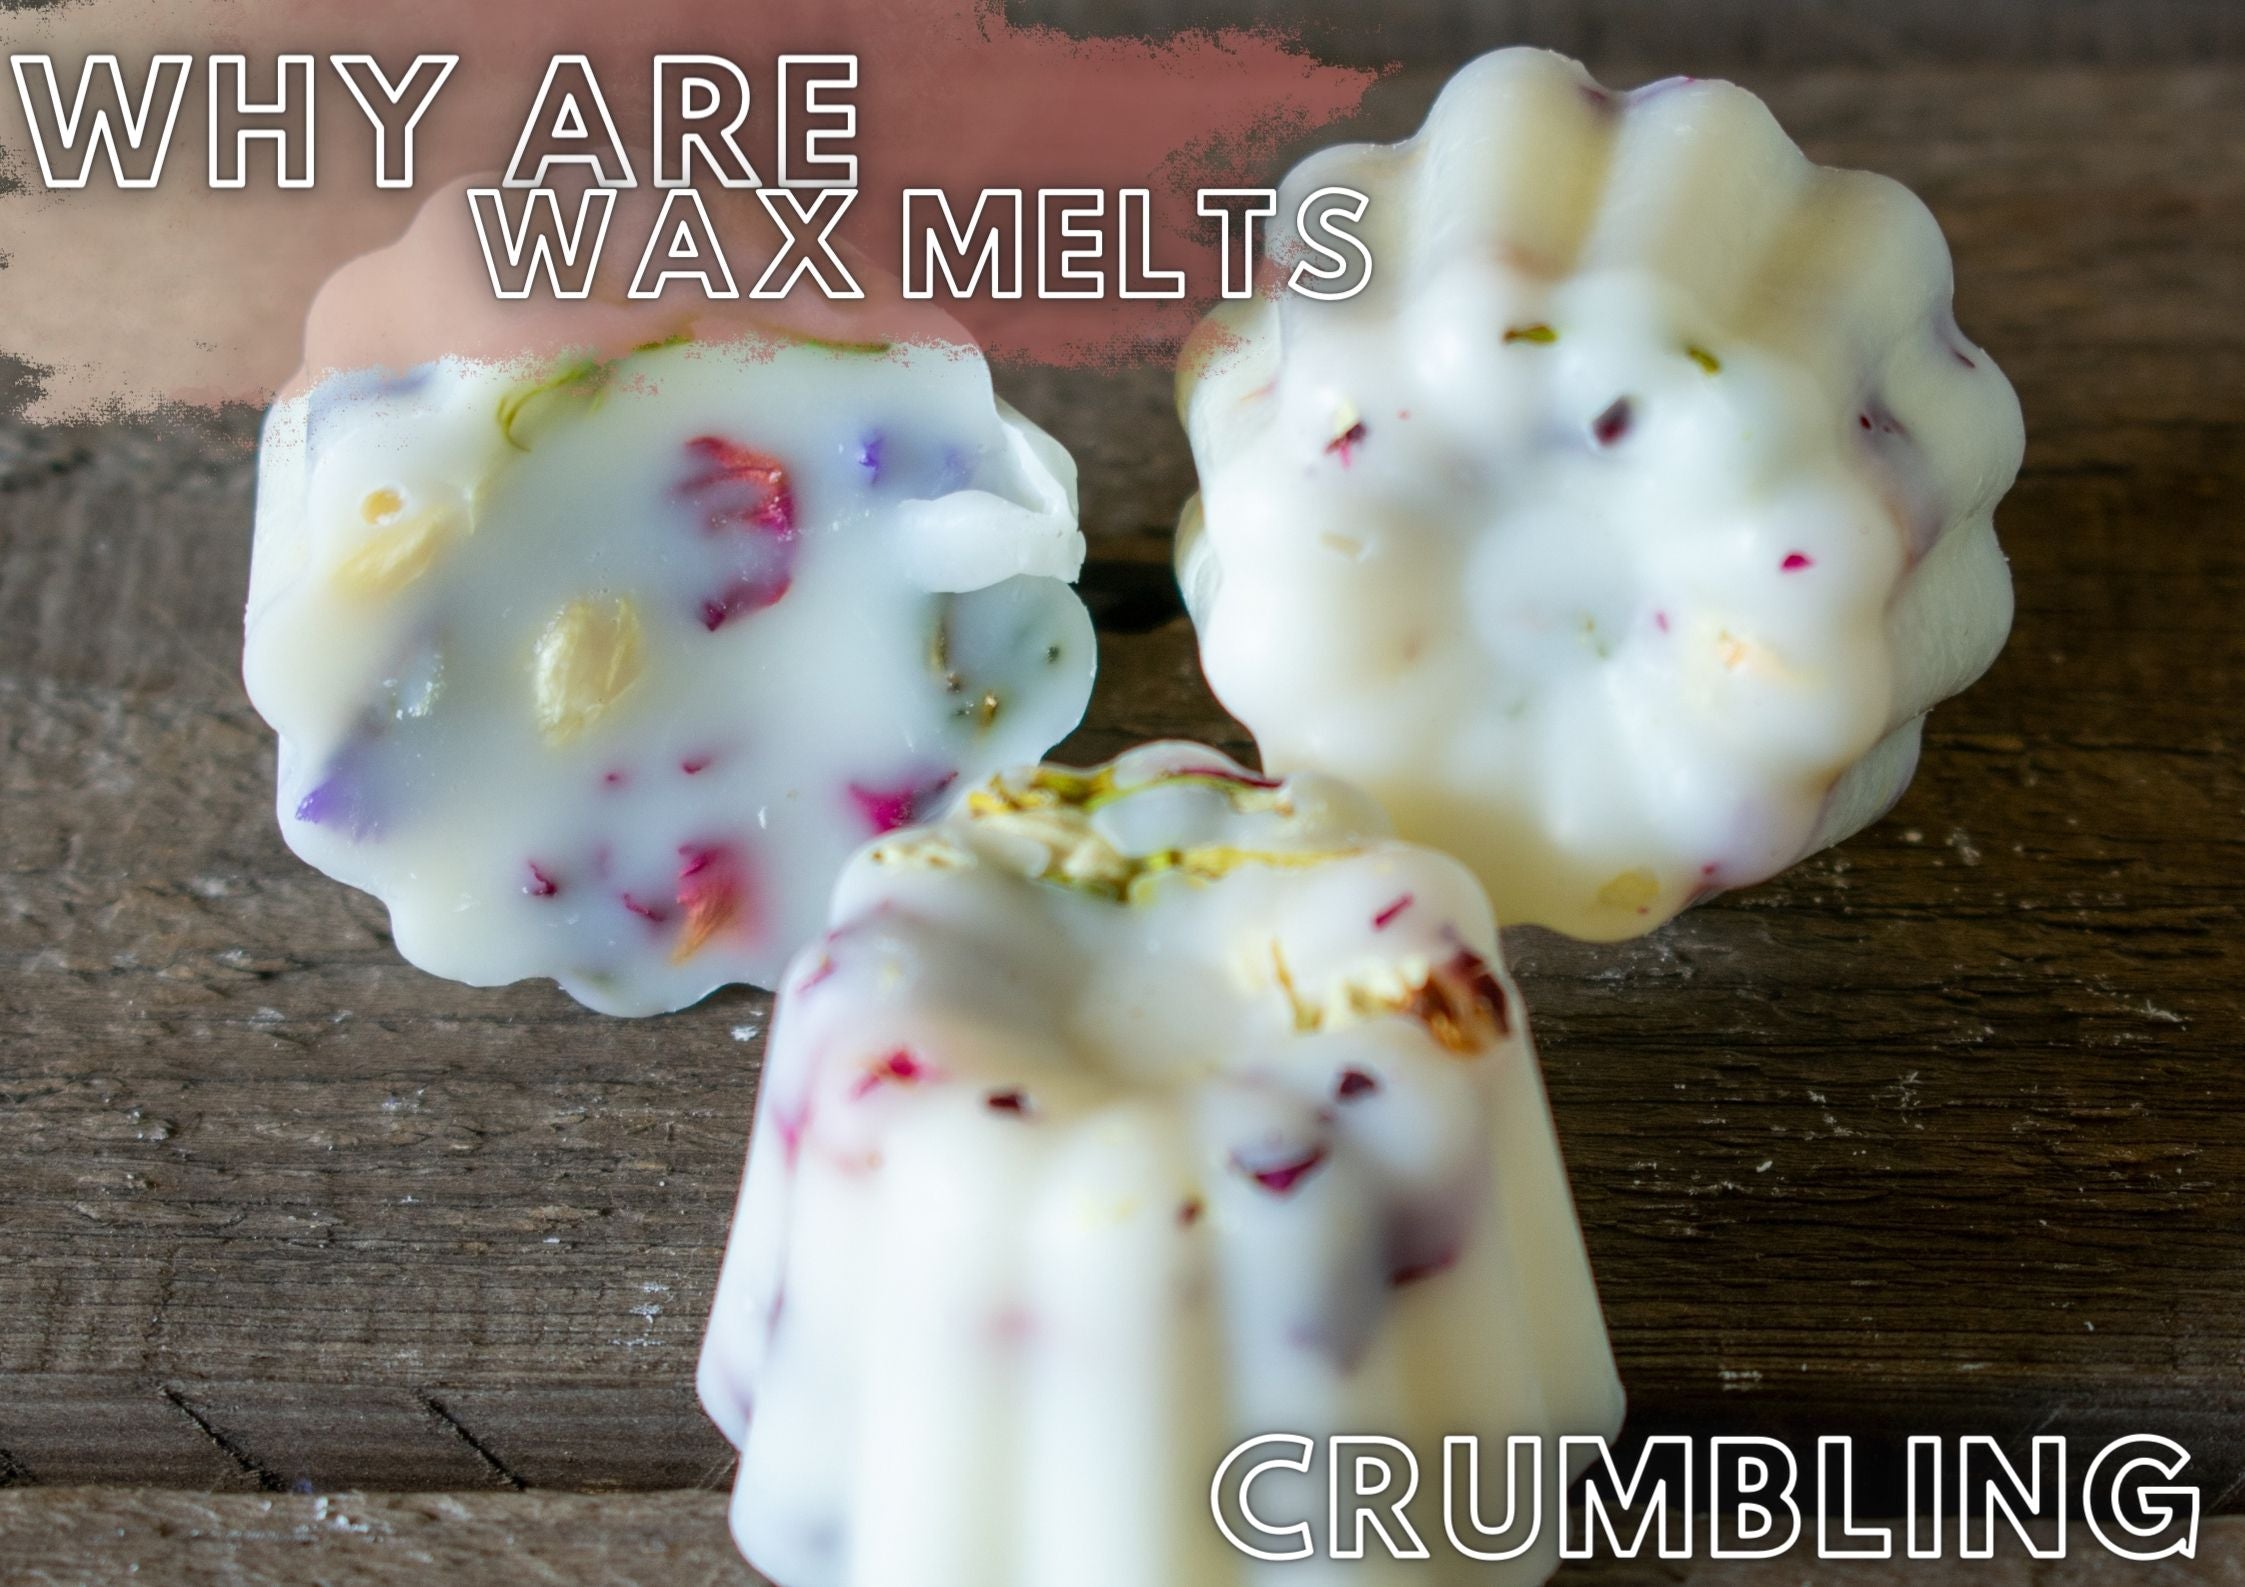 What Do I Do With My Wax Melts?